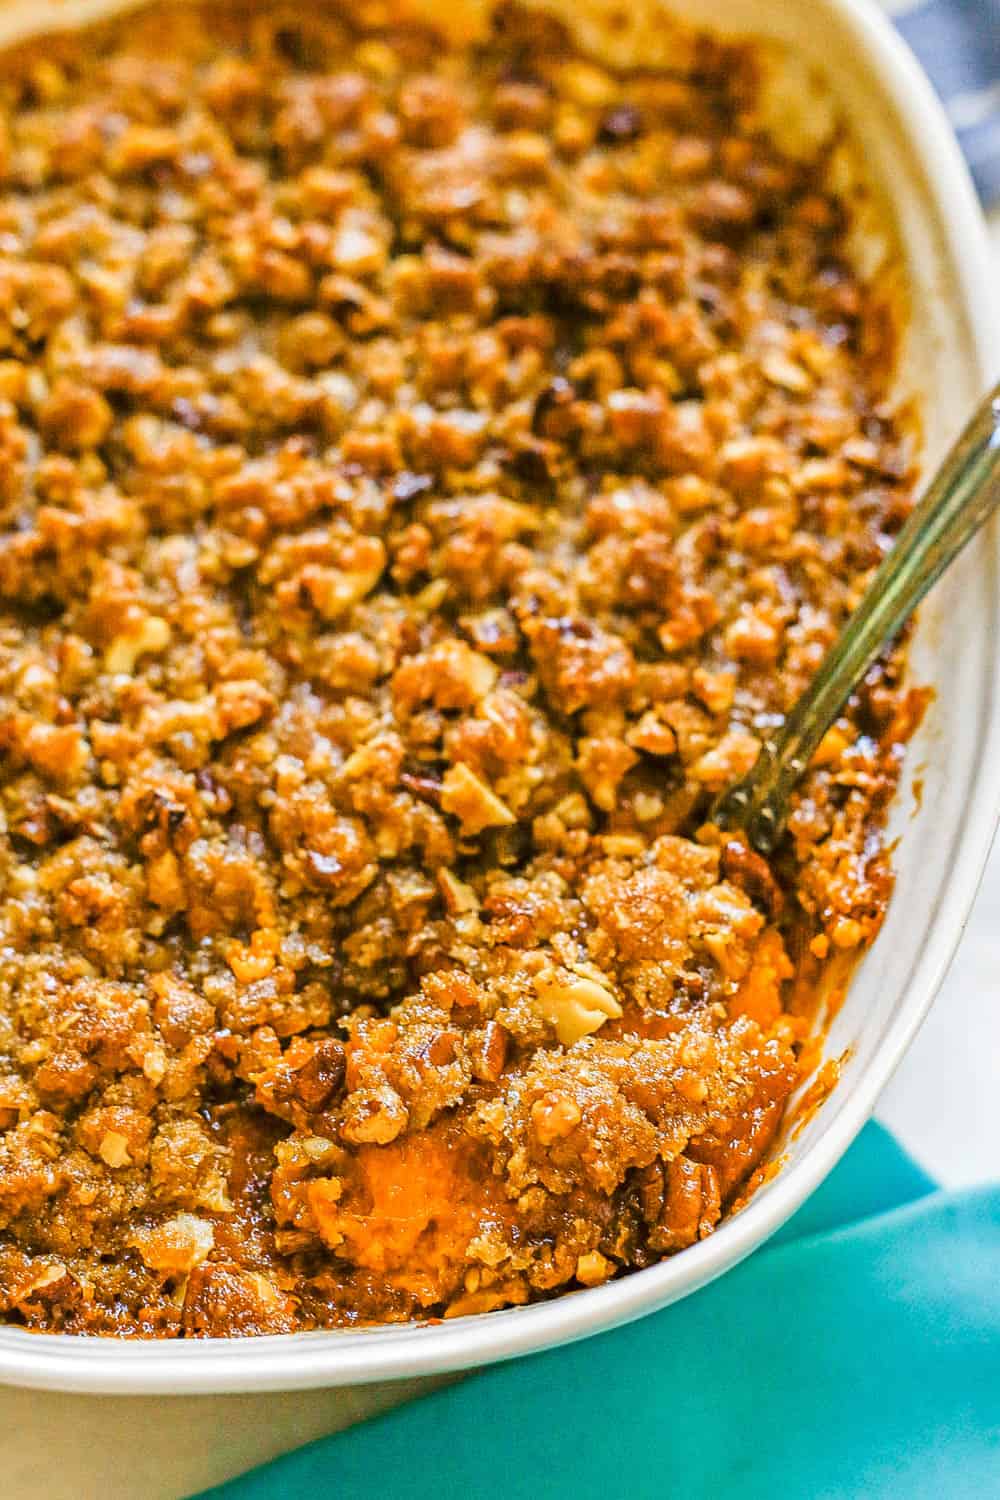 A silver serving spoon scooping out sweet potato casserole with a pecan streusel topping from a white baking dish